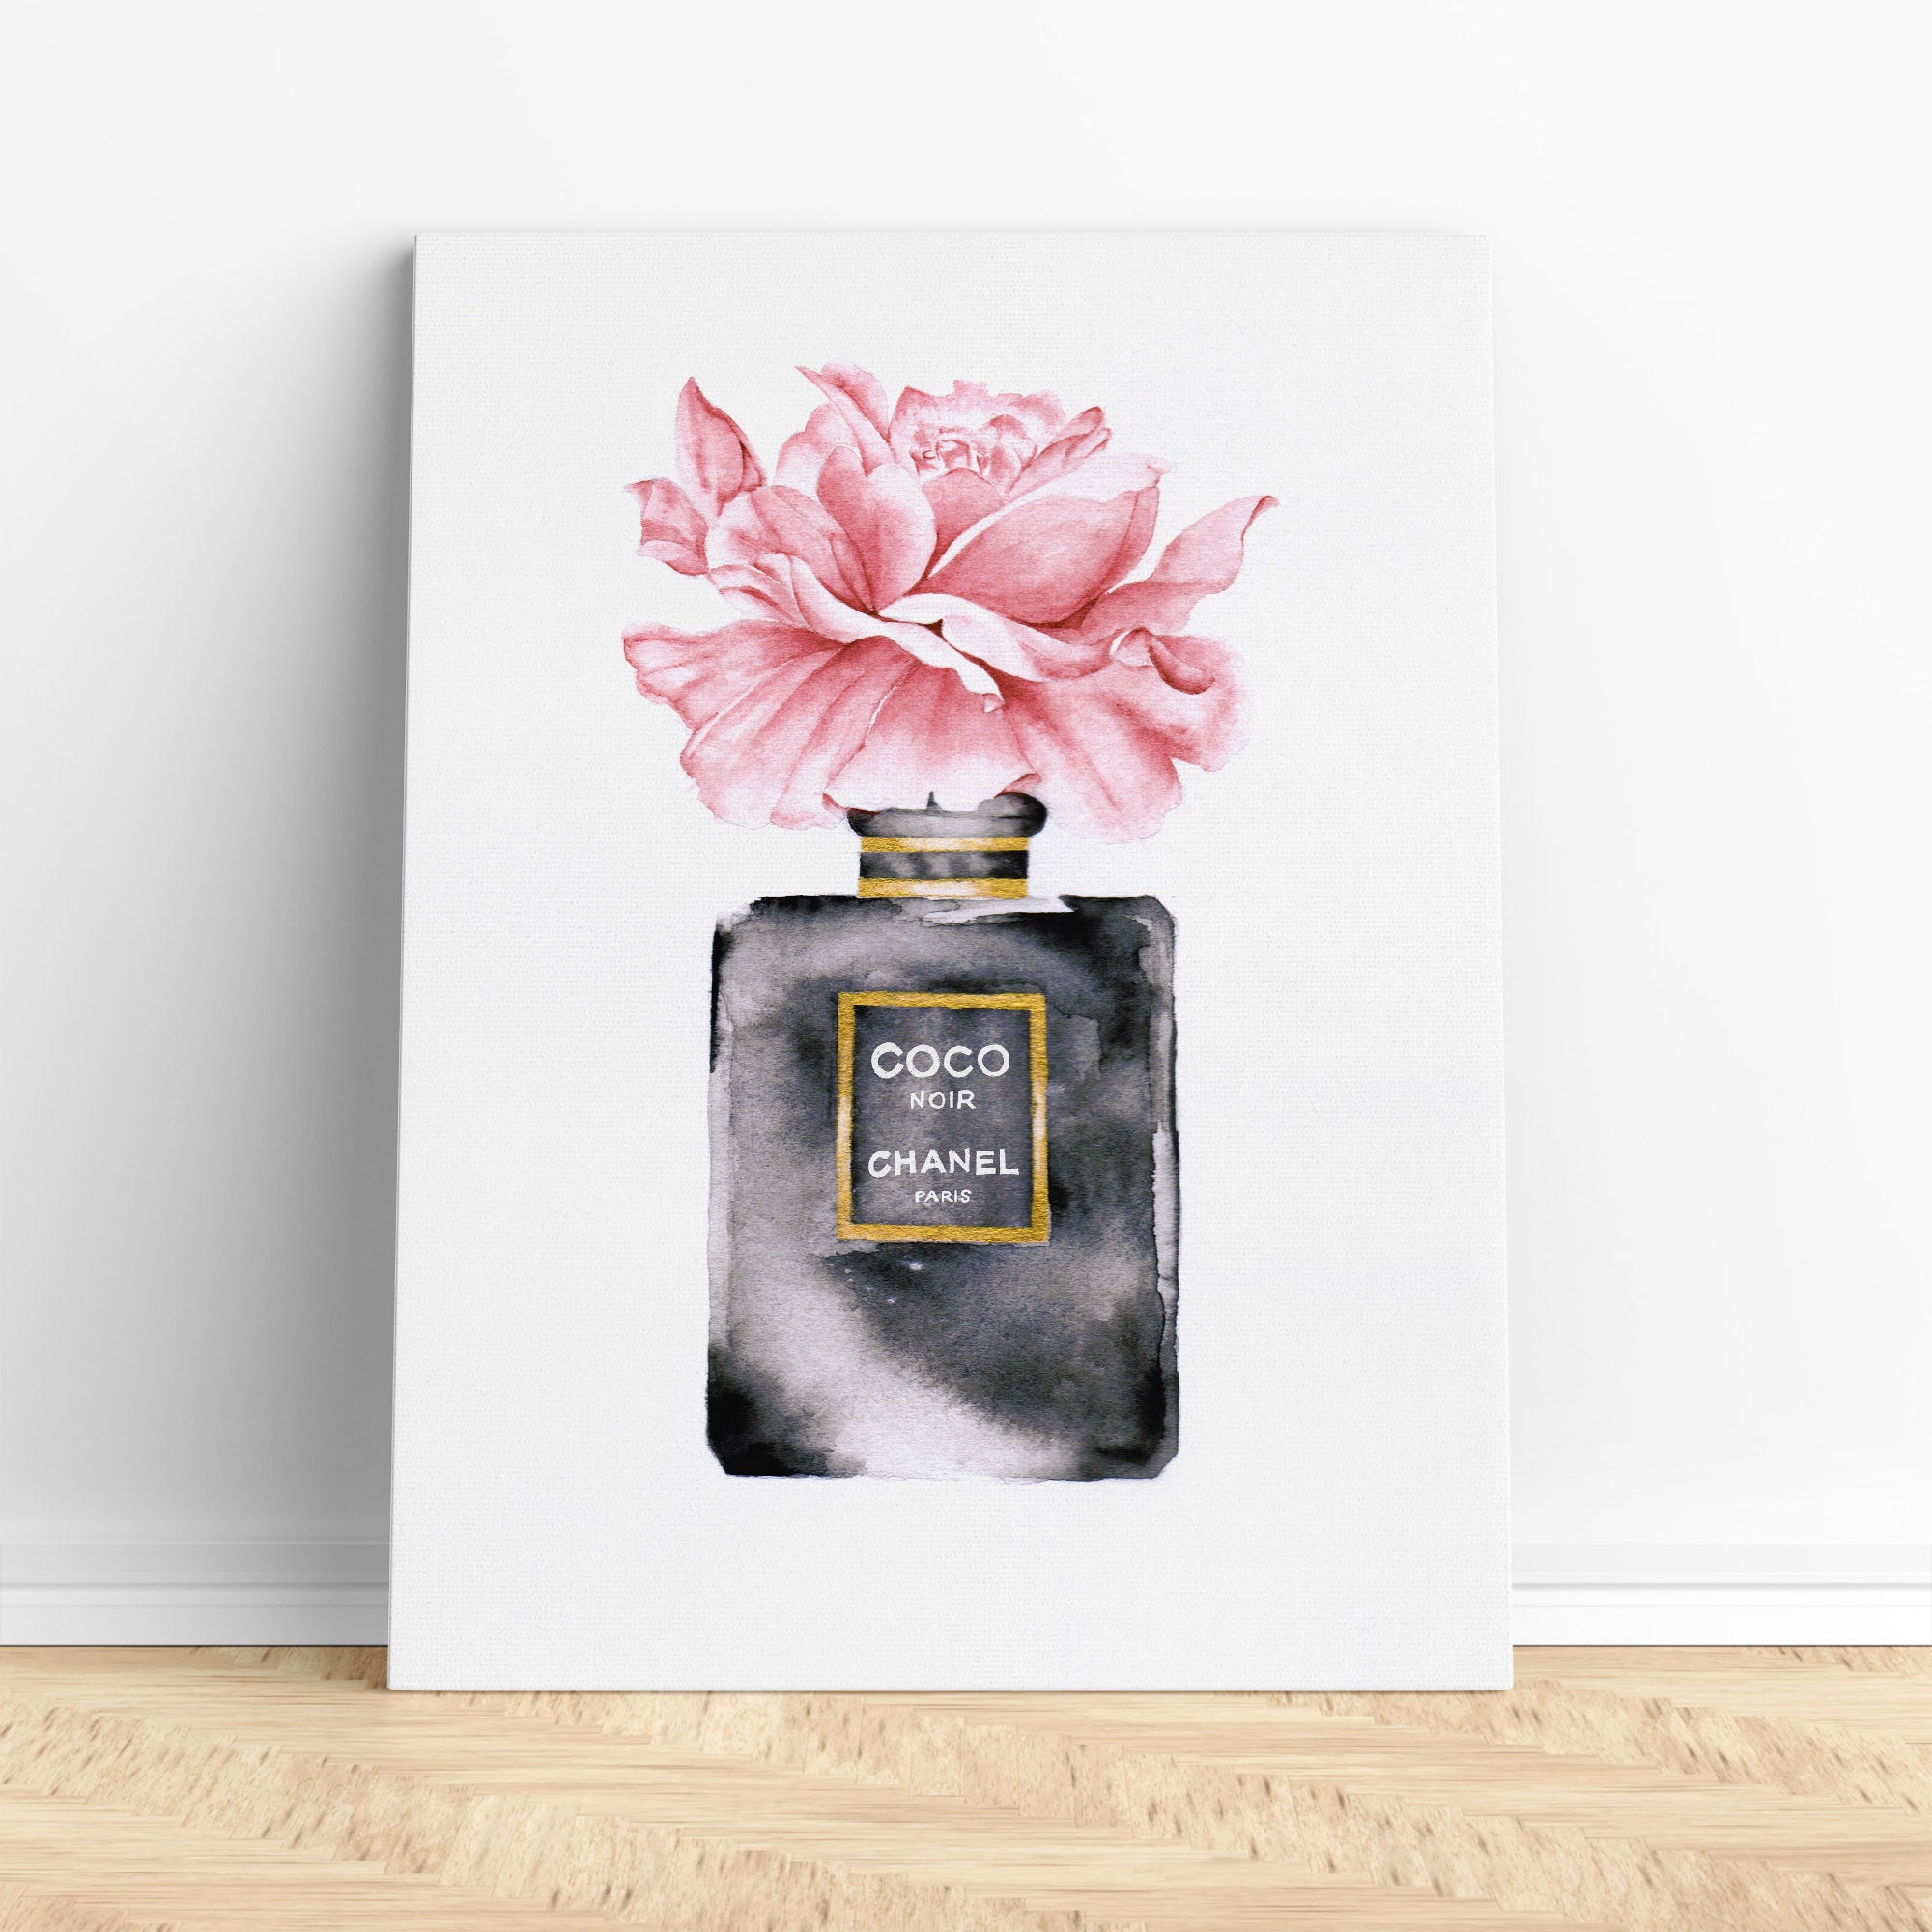 A bottle of chanel perfume next to a hat and flowers photo – Free